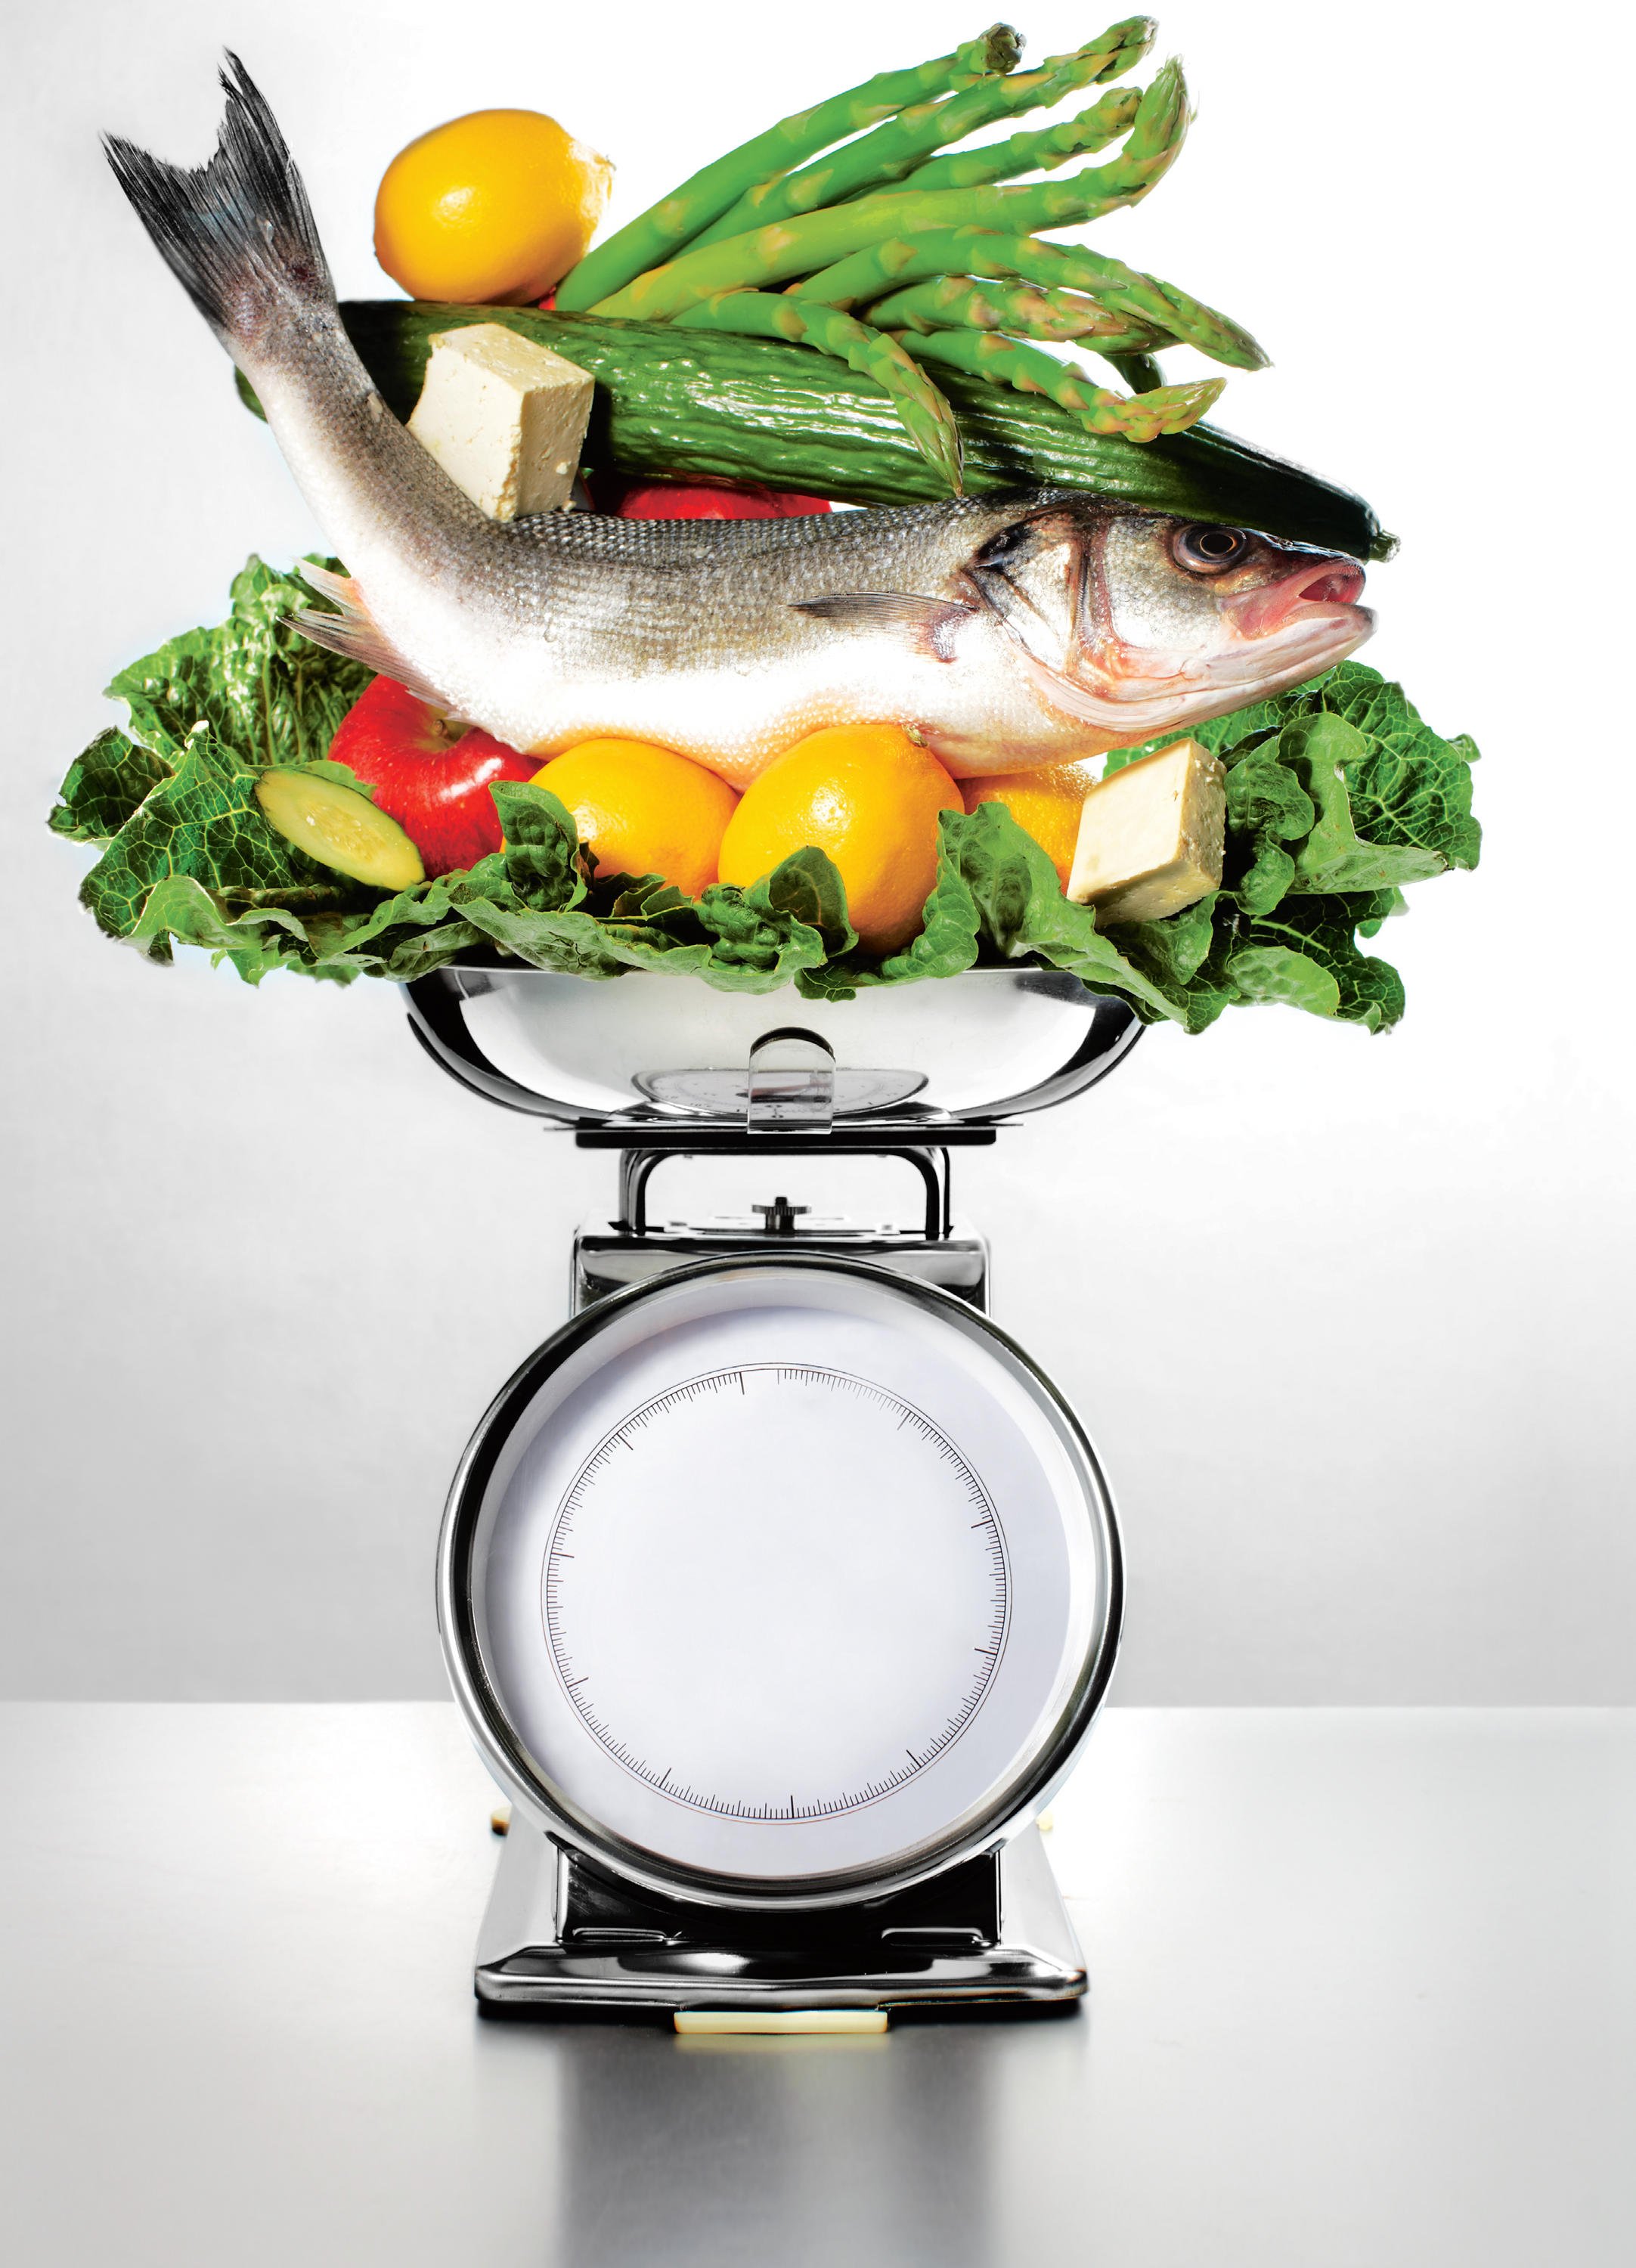 The Dukan Diet: Like Atkins, only healthier